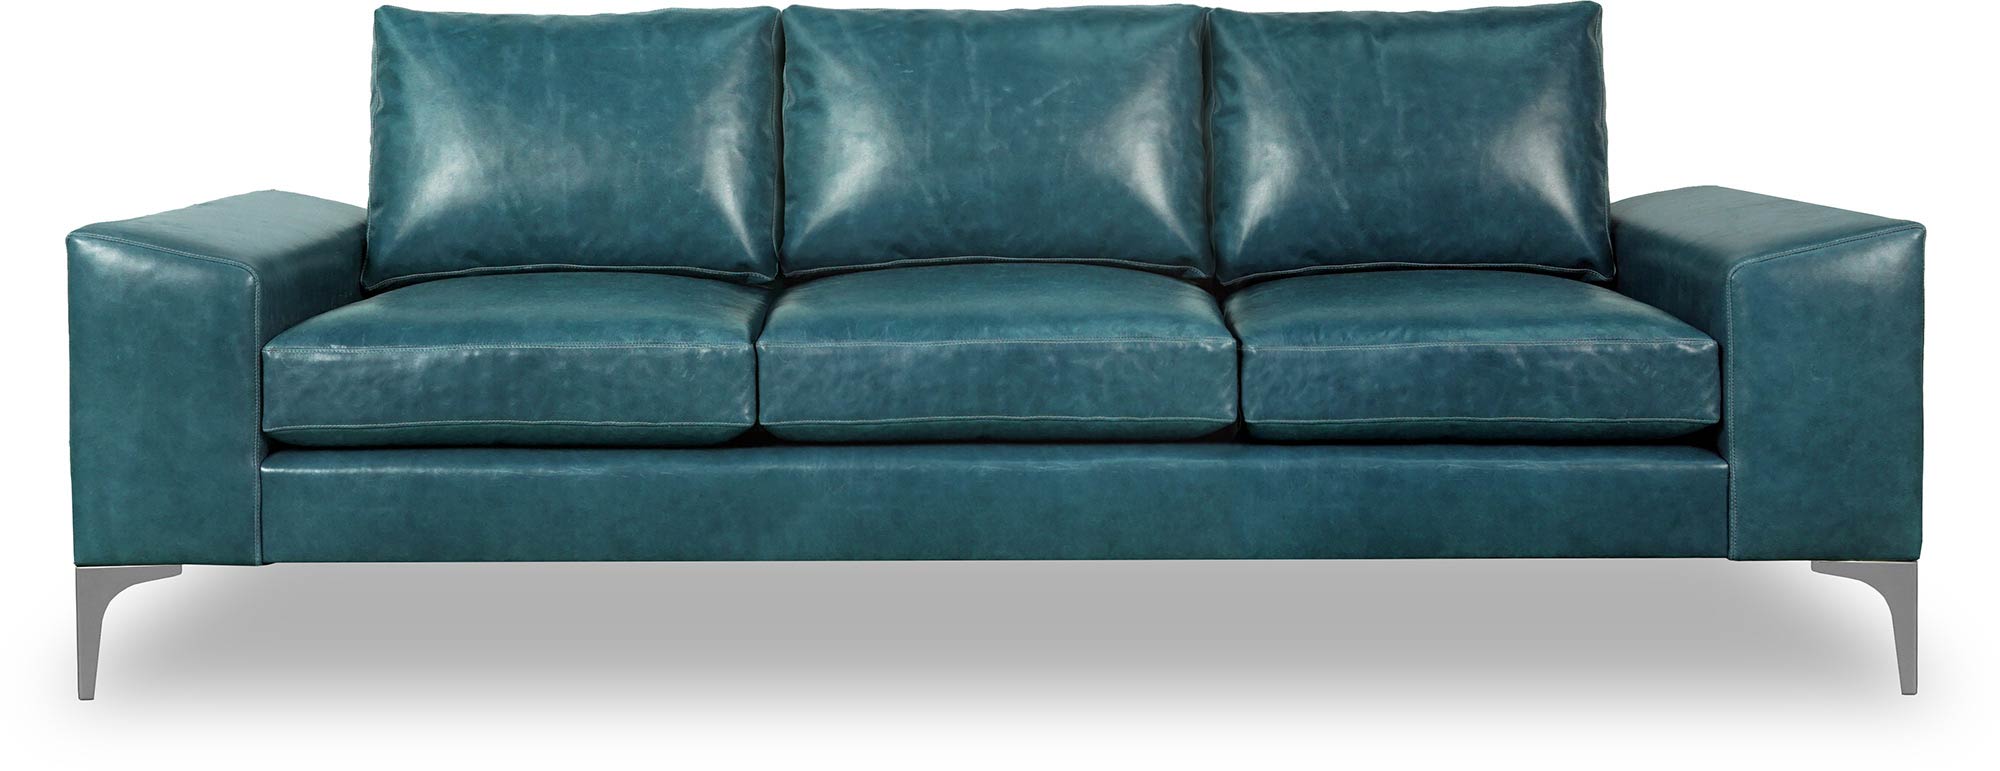 91 Cricket contemporary sofa in Cortina Bay 5625 turquoise leather